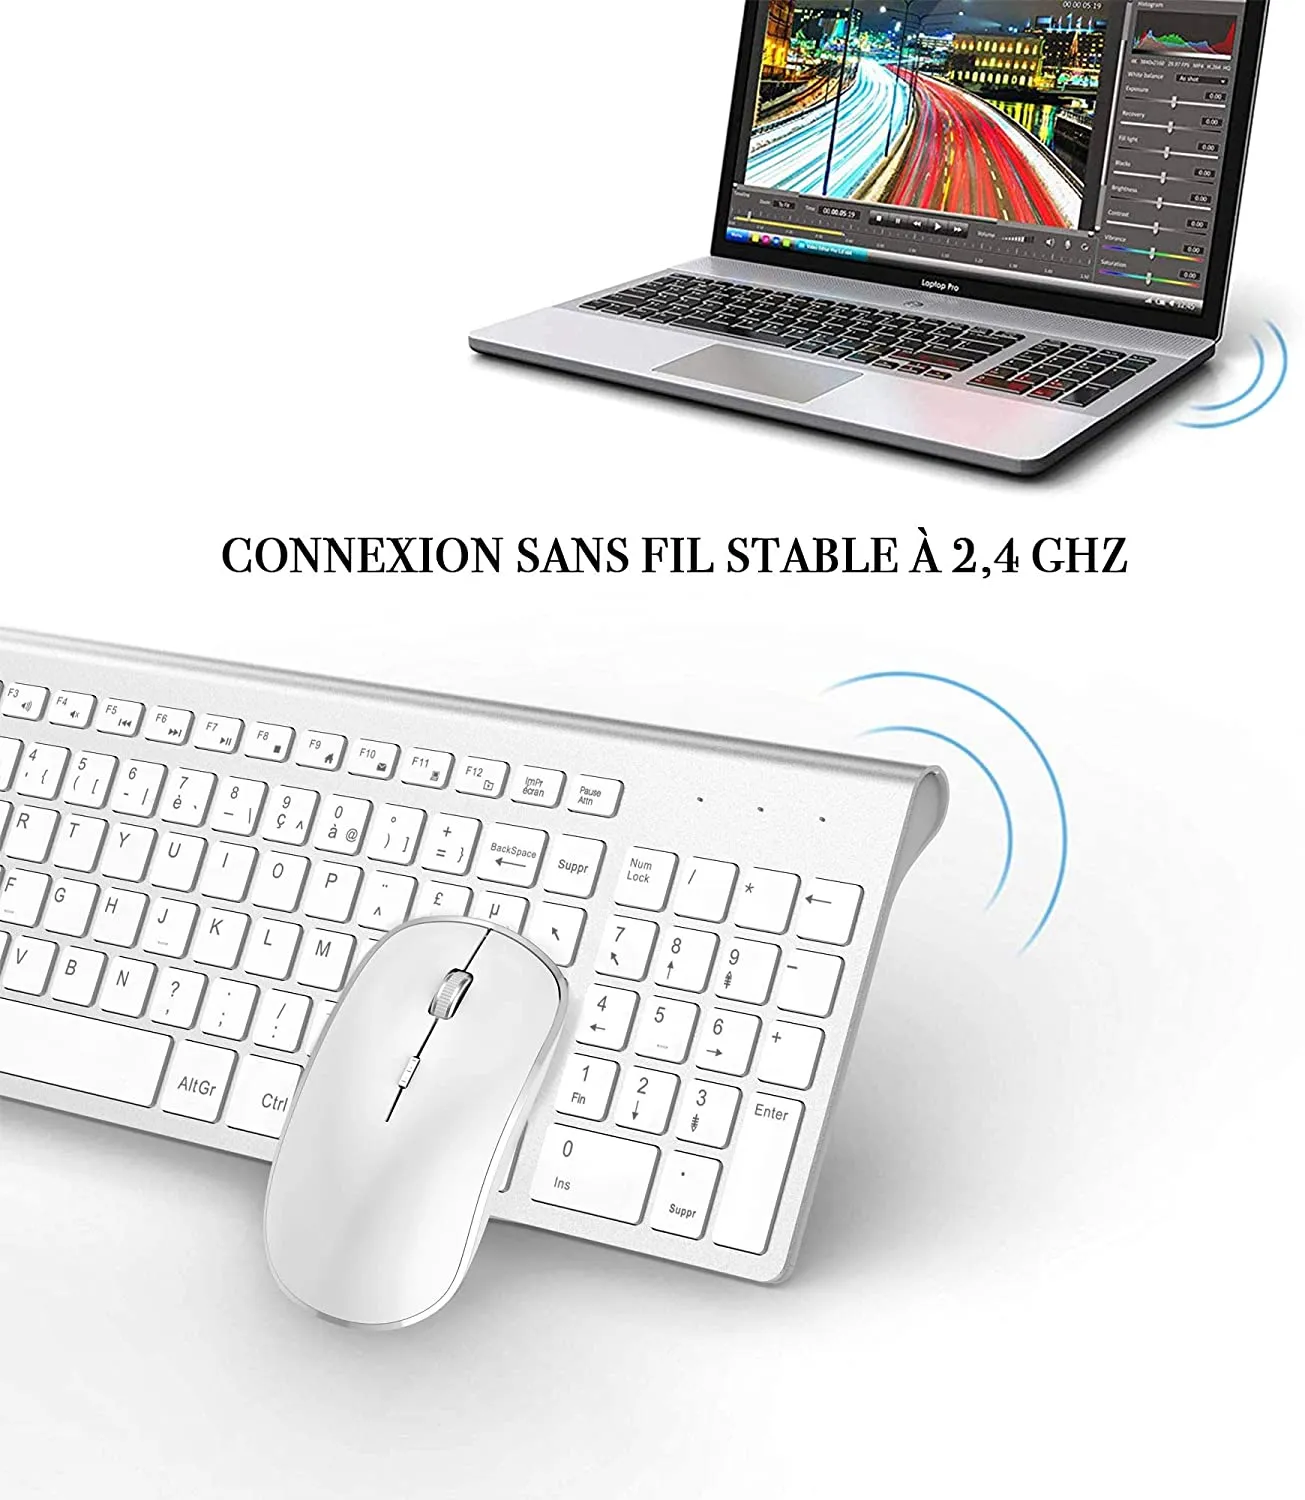 He09be9bc709e448486f84d04c800422e6 French 2.4G Wireless Keyboard Mouse Compatible with iMac PC Laptop Tablet Computer Windows (Silver White)